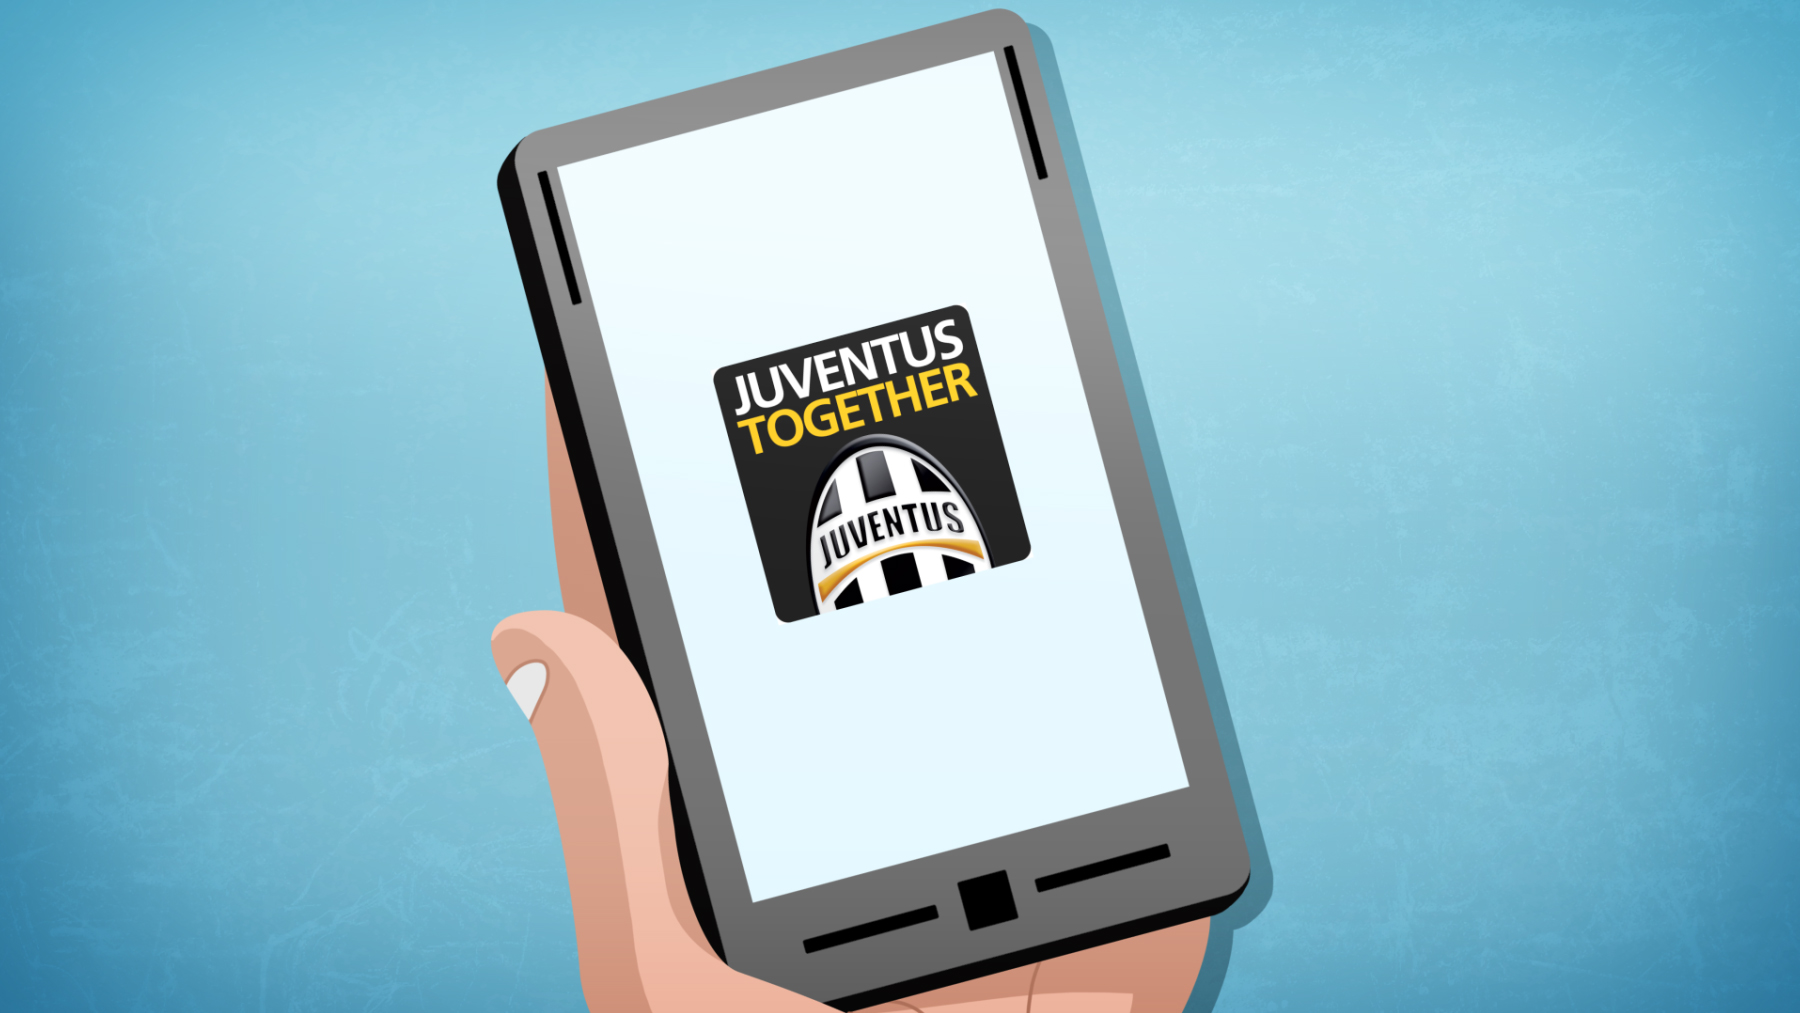 JUVENTUS_TOGHETHER_racoonstudio_infographic_animation_5